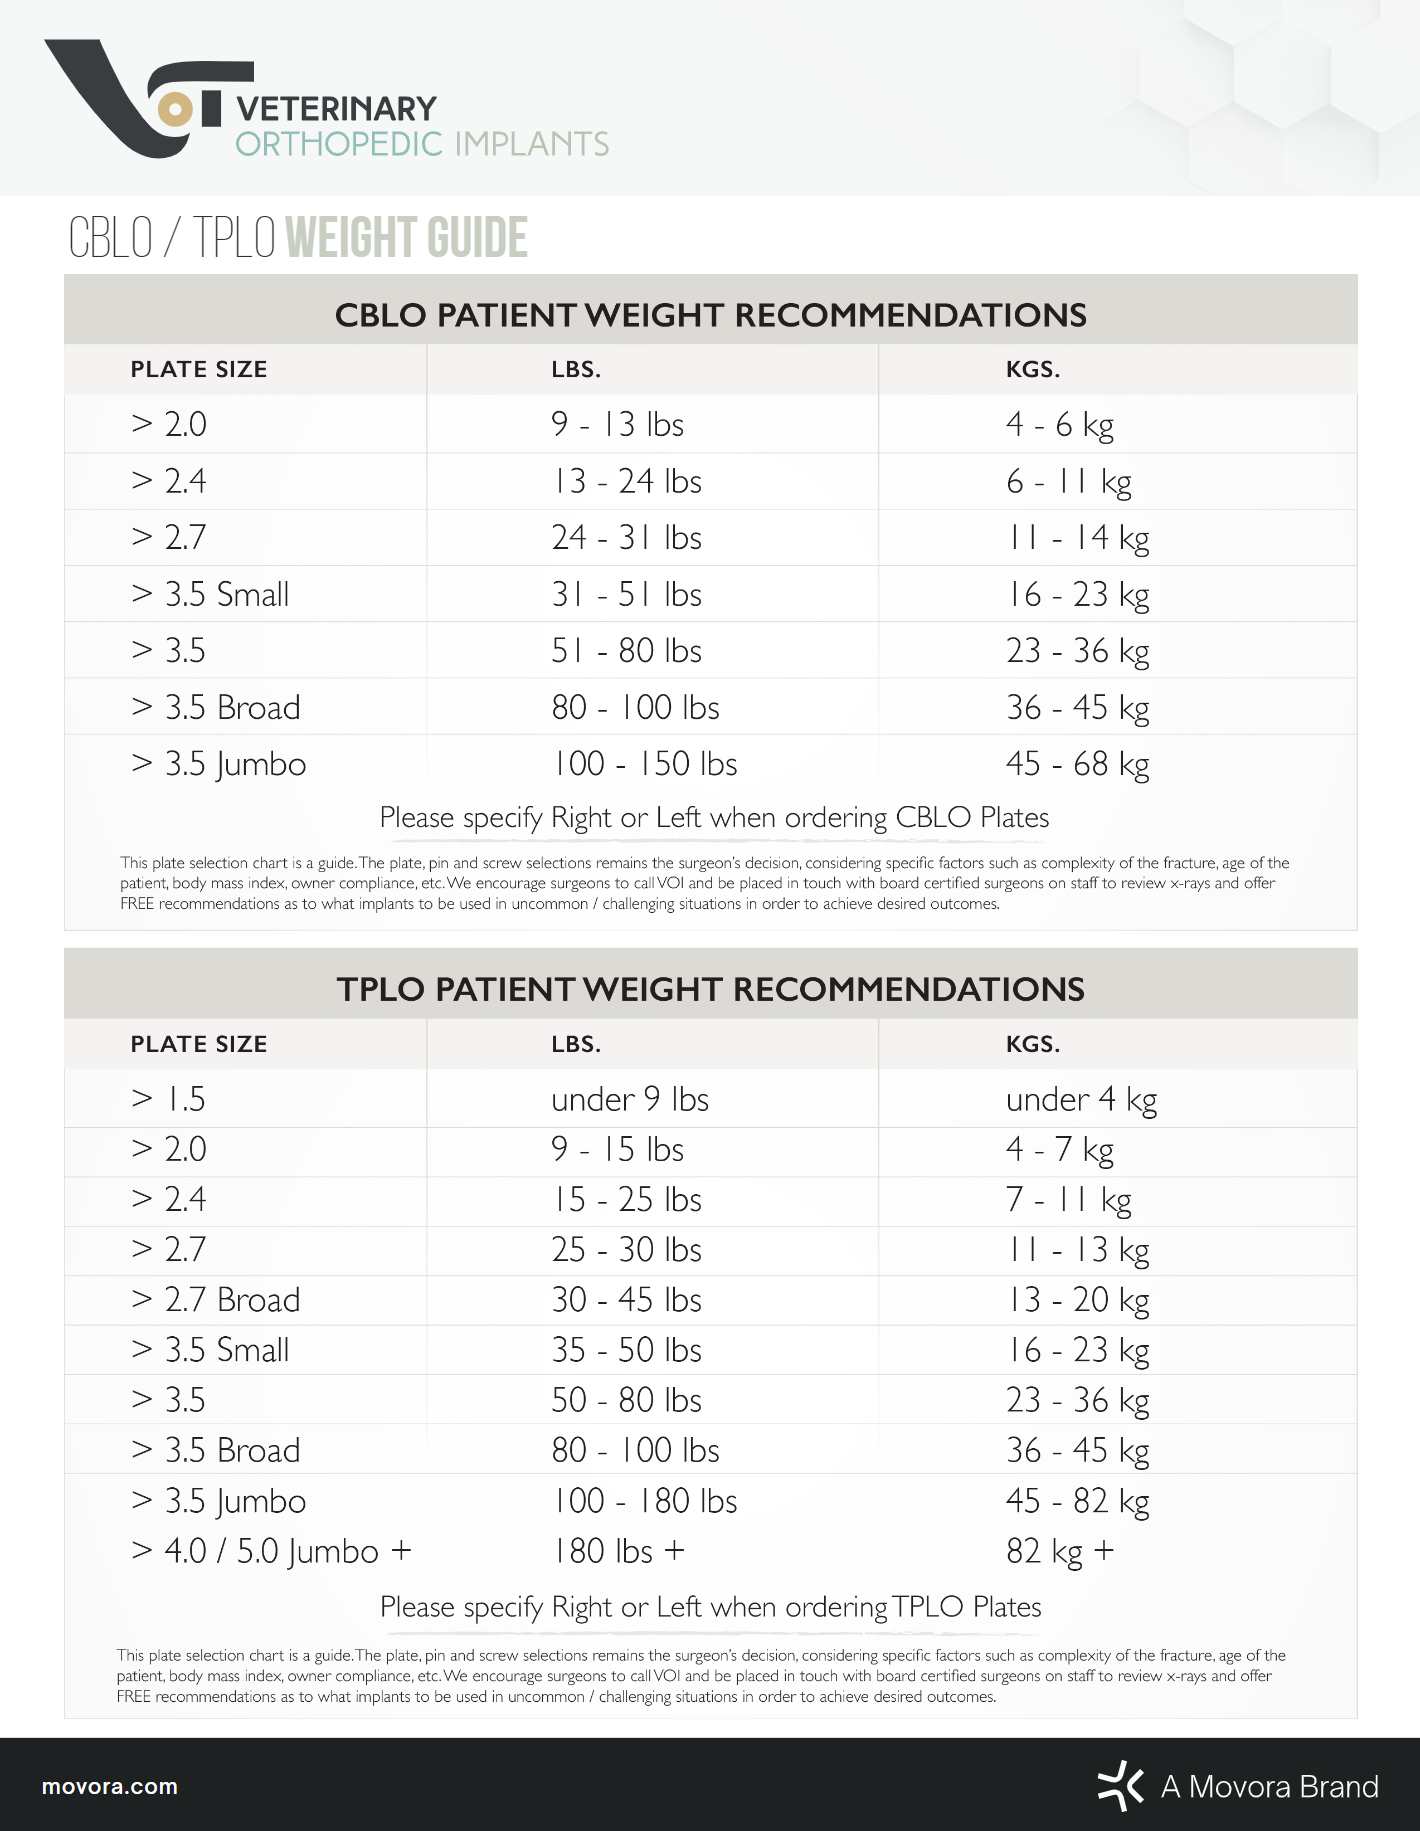 TPLO Weight Guide